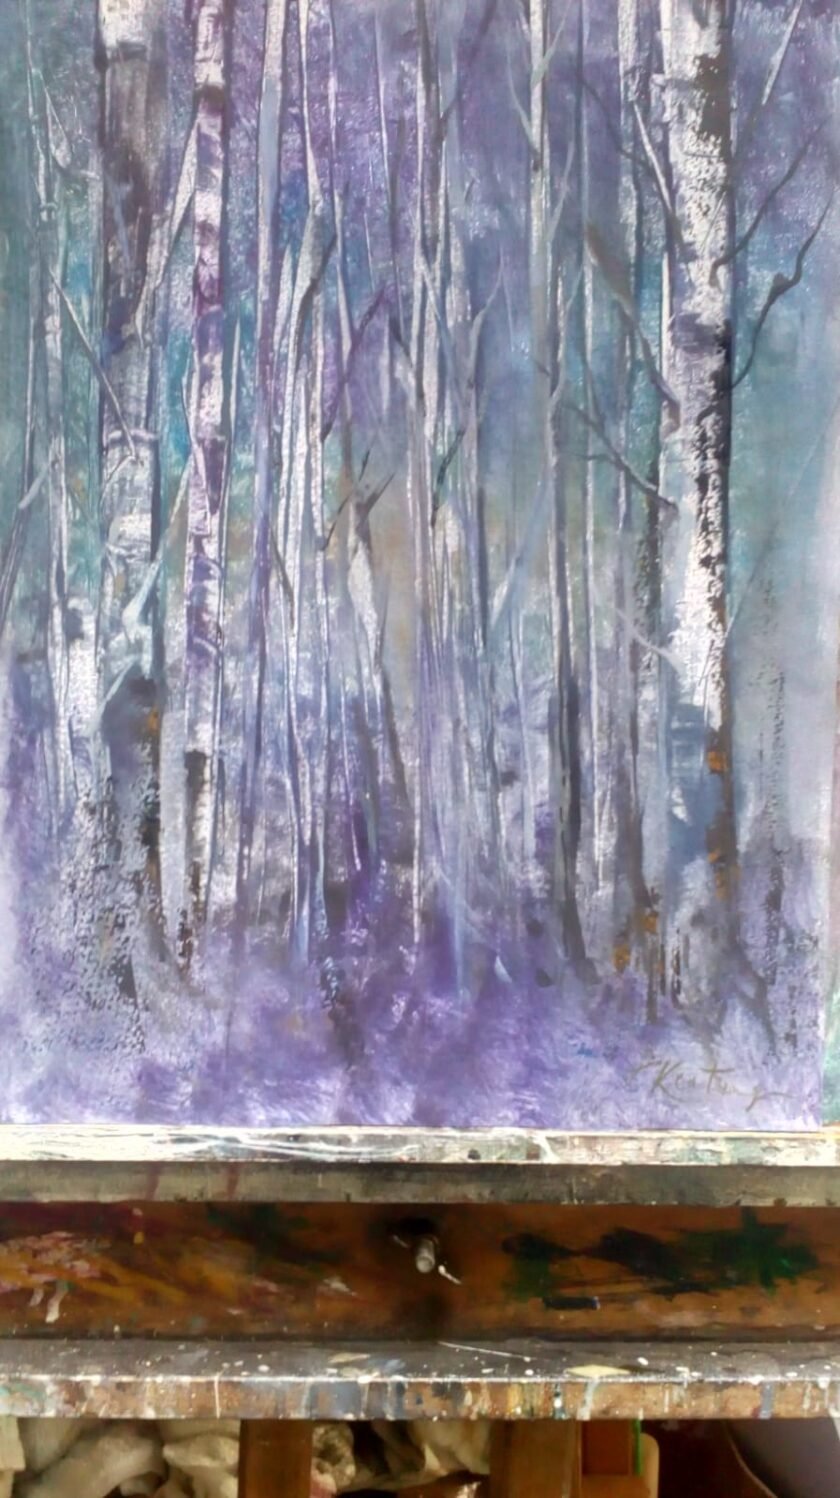 Tree's in Winter - Monotype on Paper - John Keating - Nua Collective - Artist